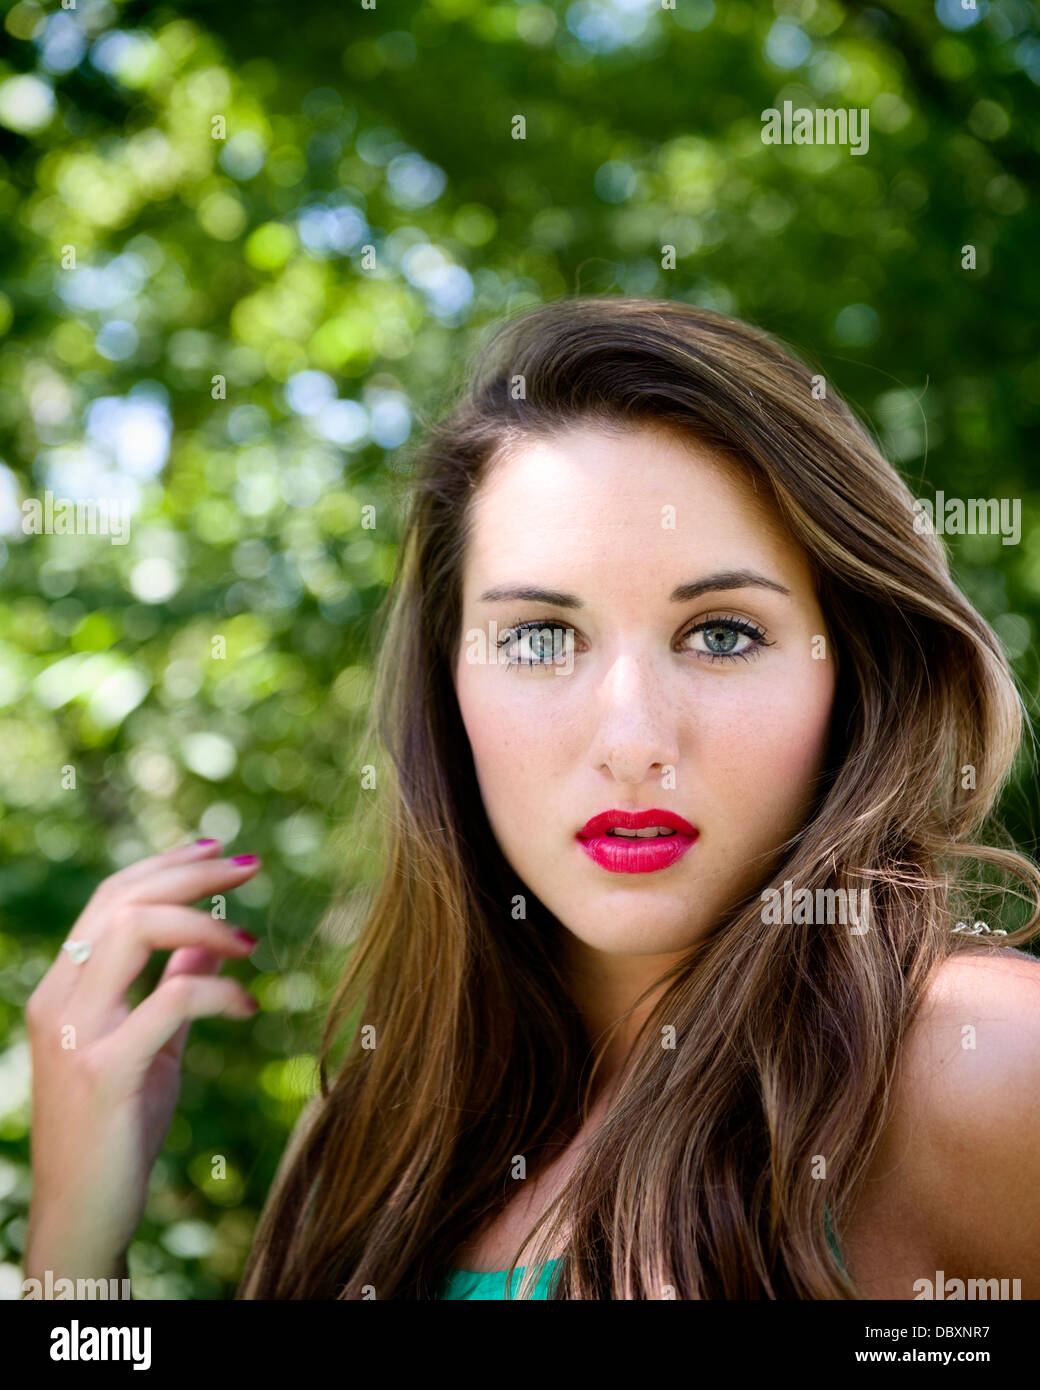 Portrait of attractive woman with brown hair outside with green leaves in the background Stock Photo